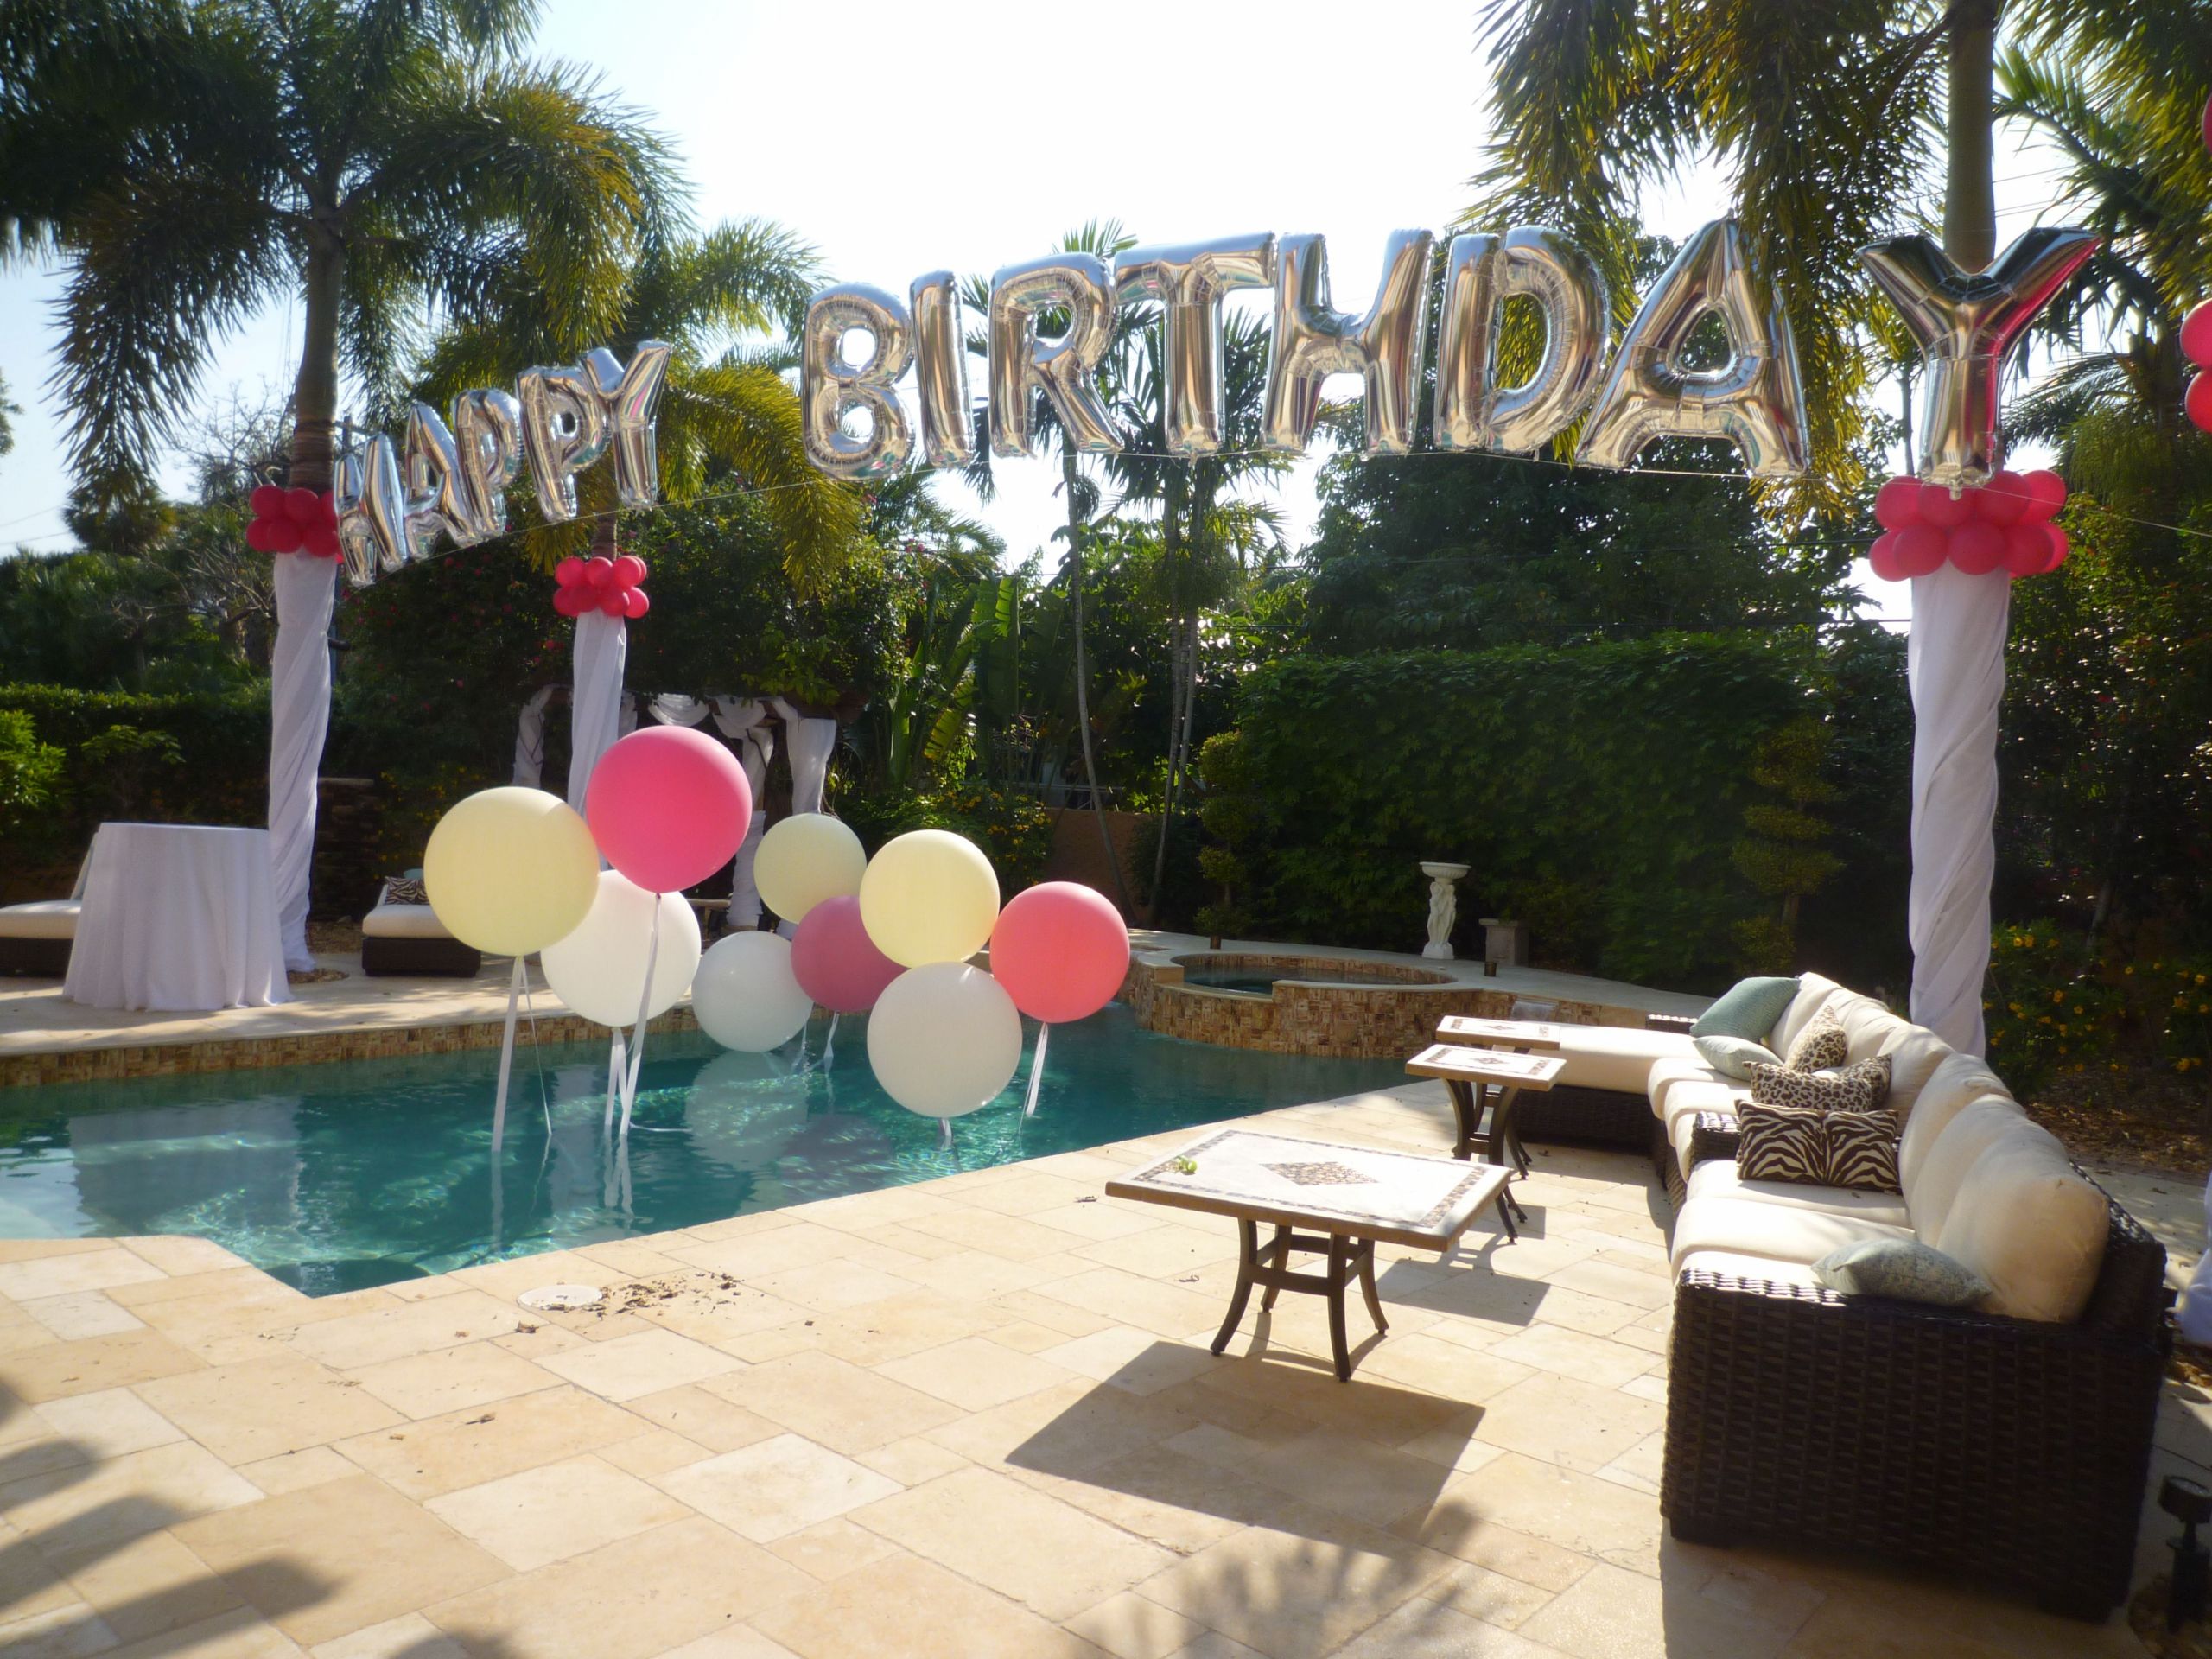 Ideas For Backyard Girls Birthday Pool Party
 Birthday balloon arch over a swimming pool Backyard party